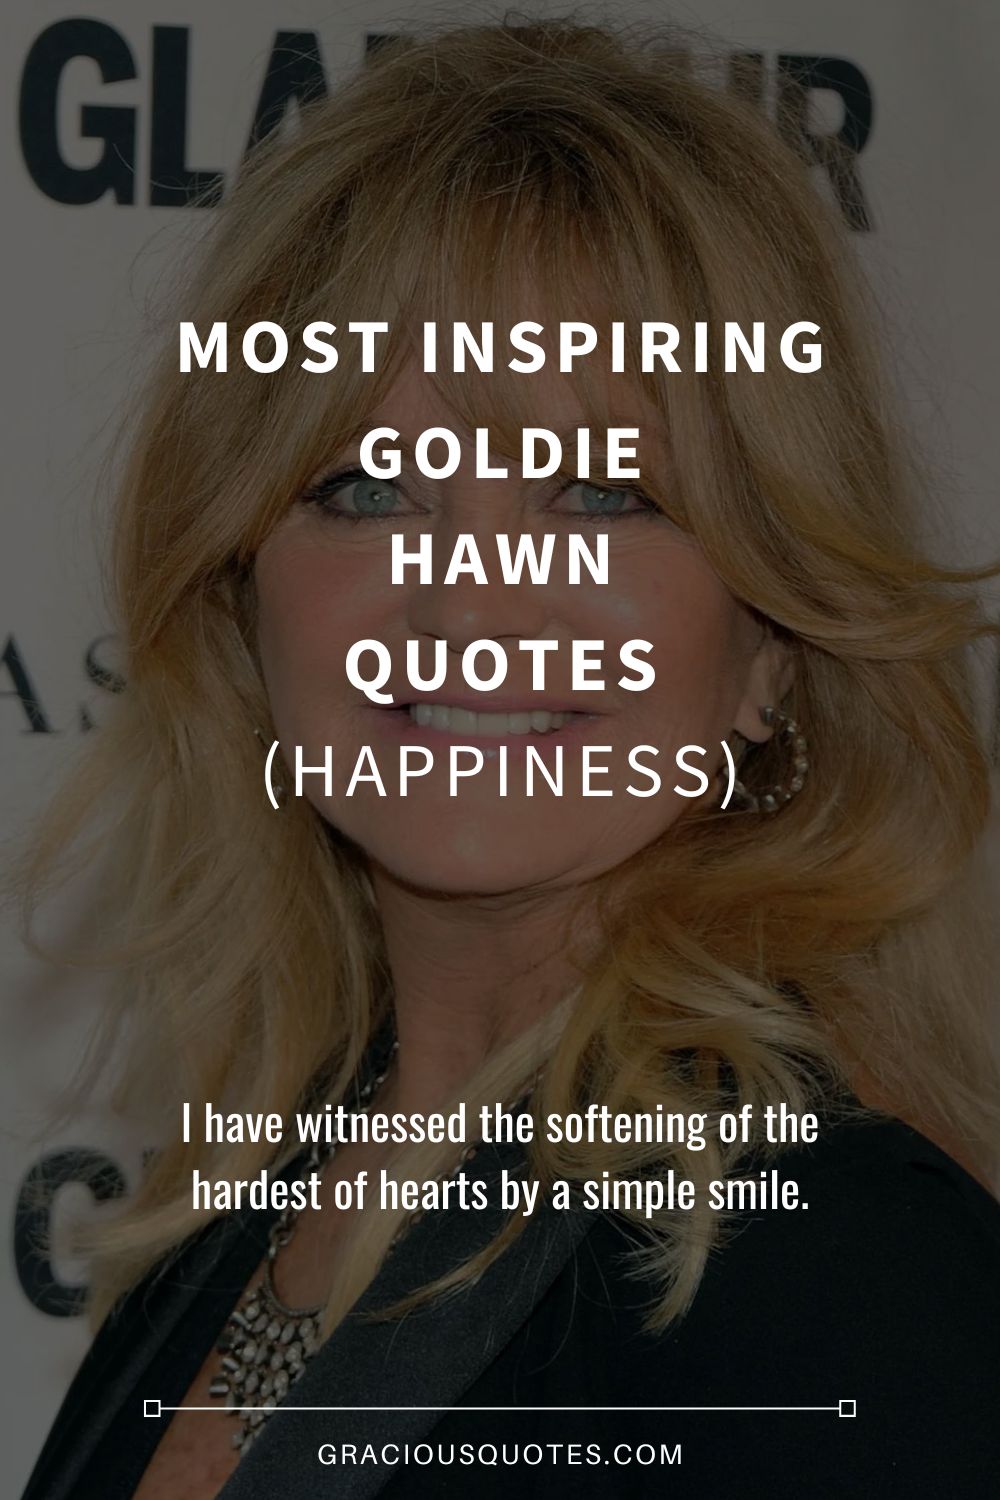 Most Inspiring Goldie Hawn Quotes (HAPPINESS) - Gracious Quotes